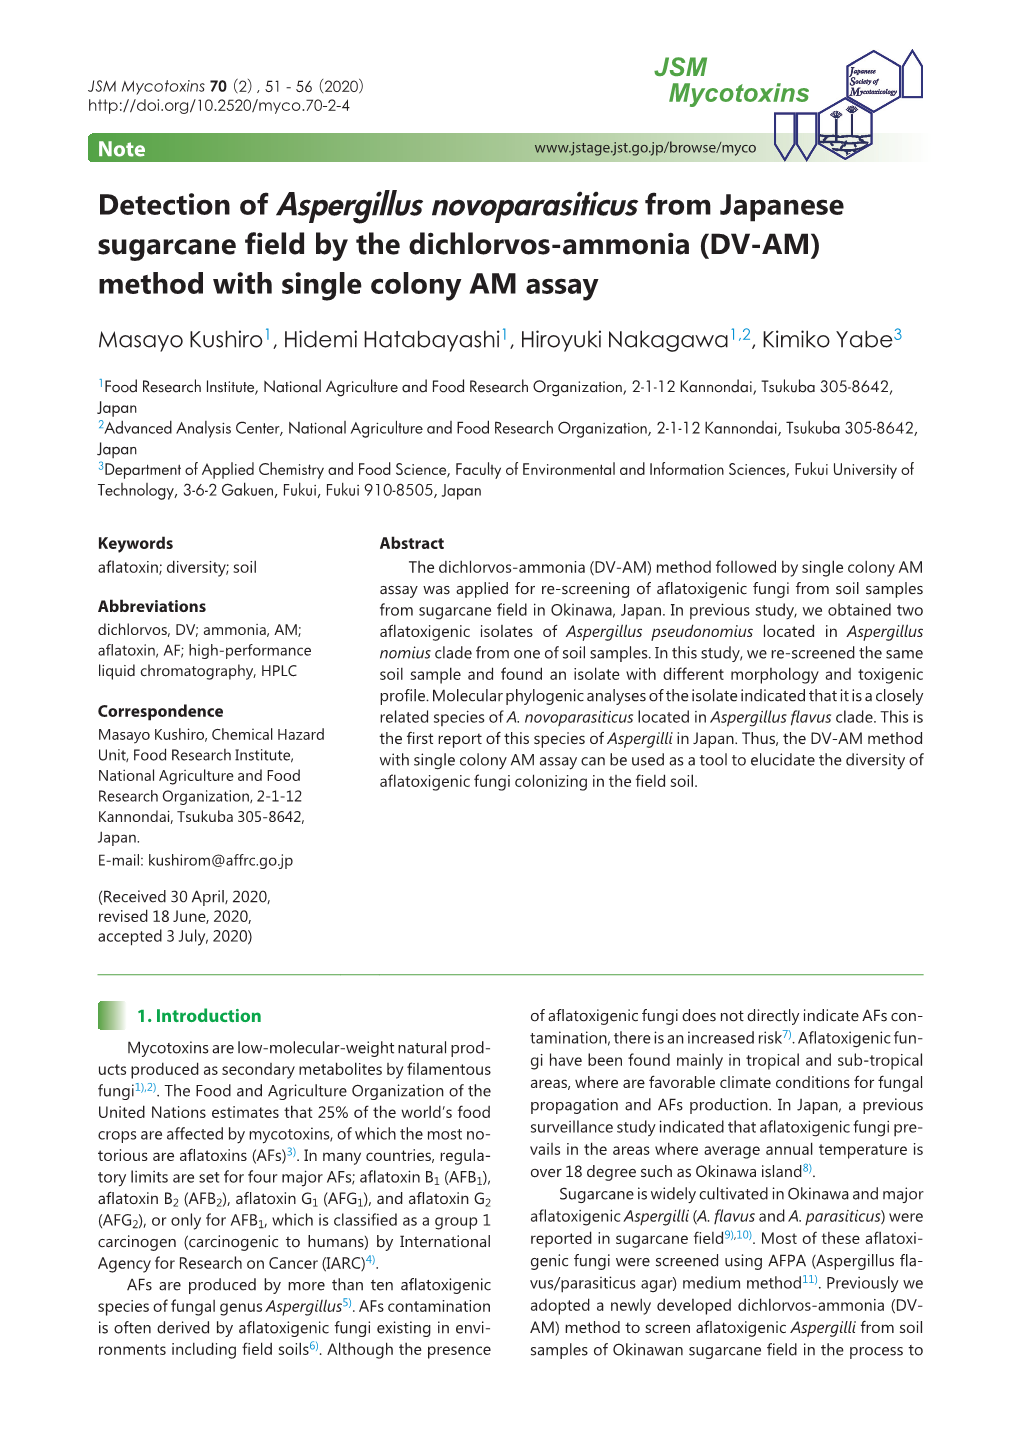 Detection of Aspergillus Novoparasiticus from Japanese Sugarcane Field by the Dichlorvos-Ammonia (DV-AM) Method with Single Colony AM Assay